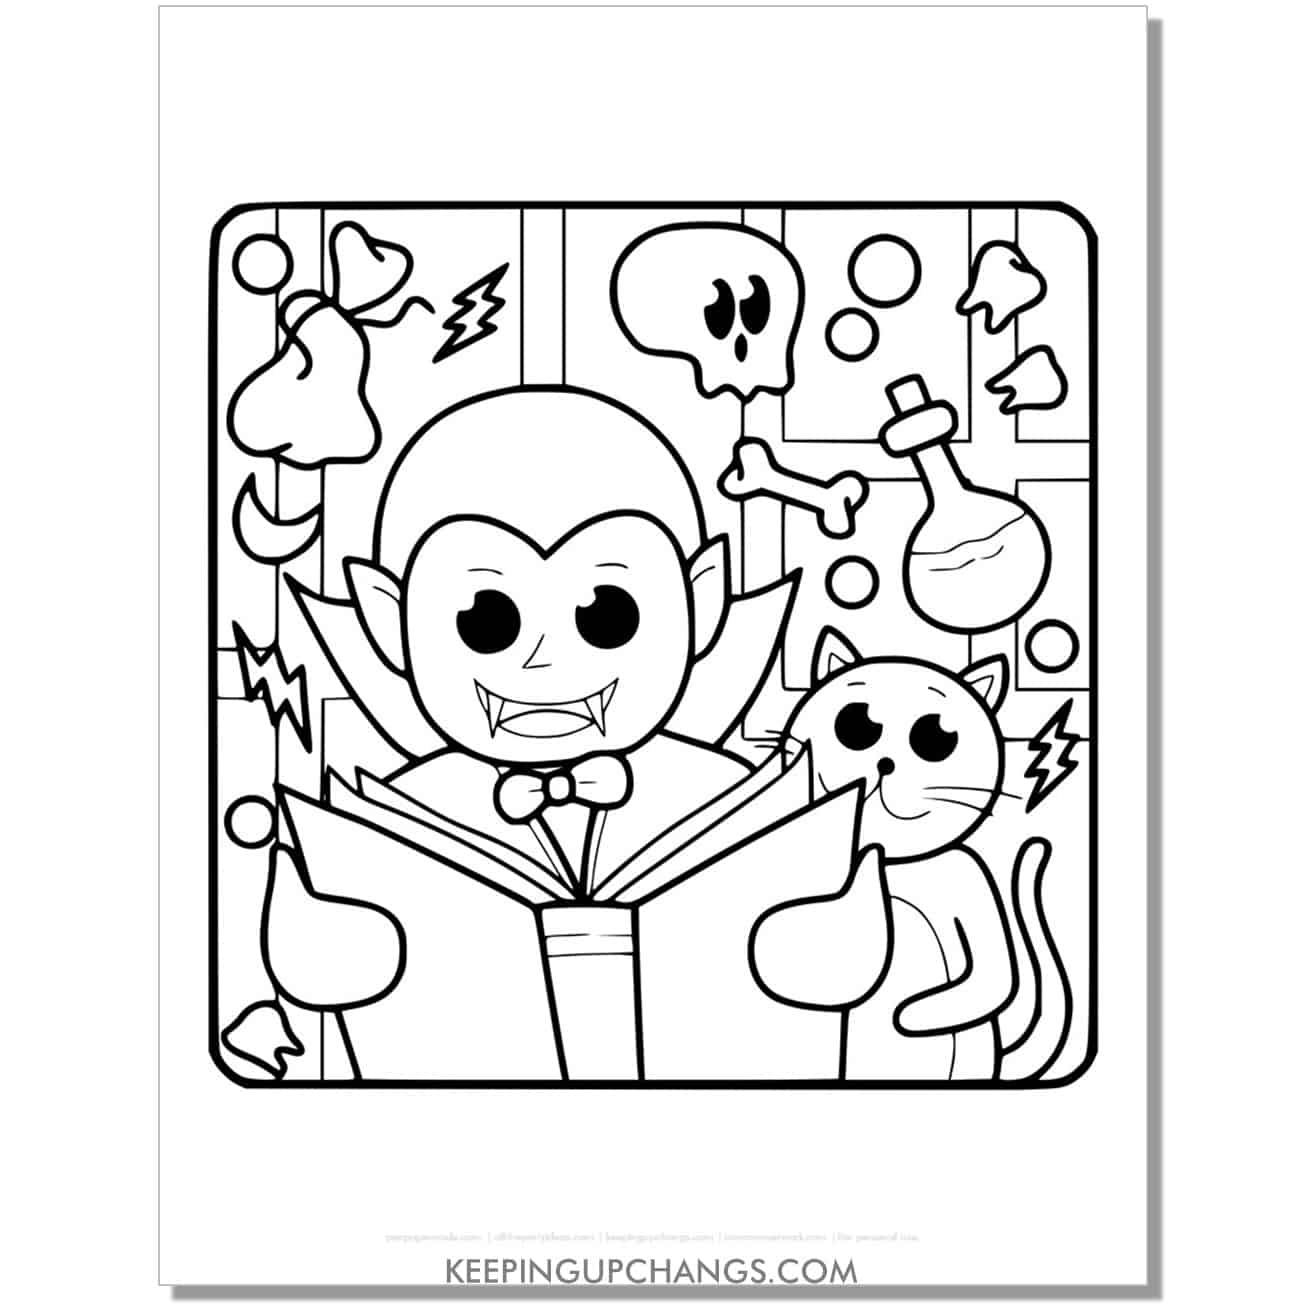 count dracula and halloween cat coloring page for kids.